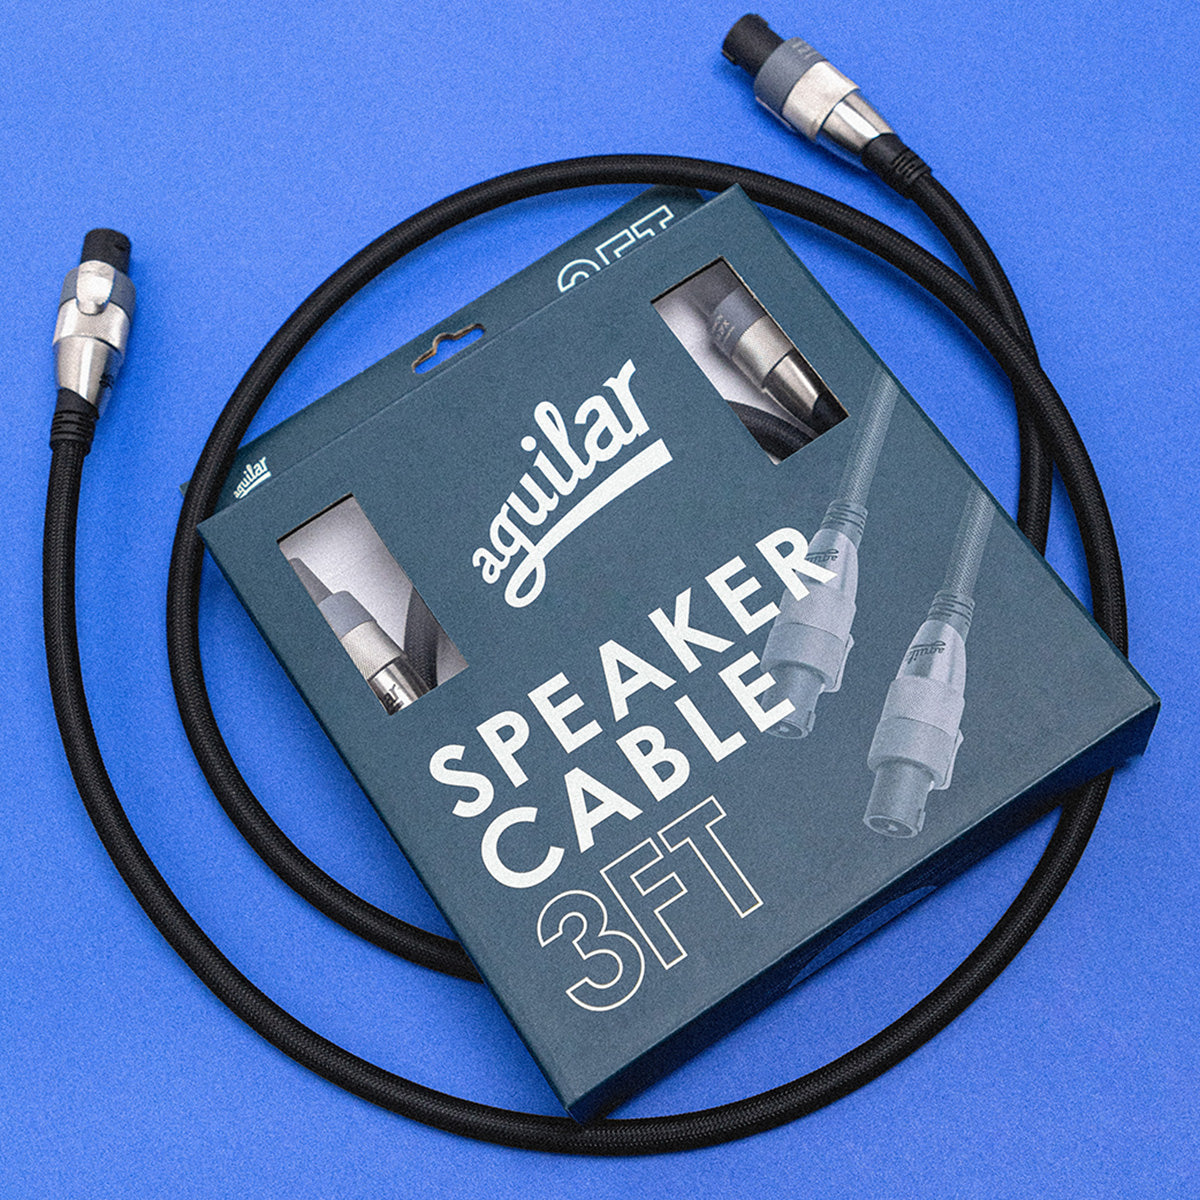 Aguilar Speaker Cable  by Aguilar Shop